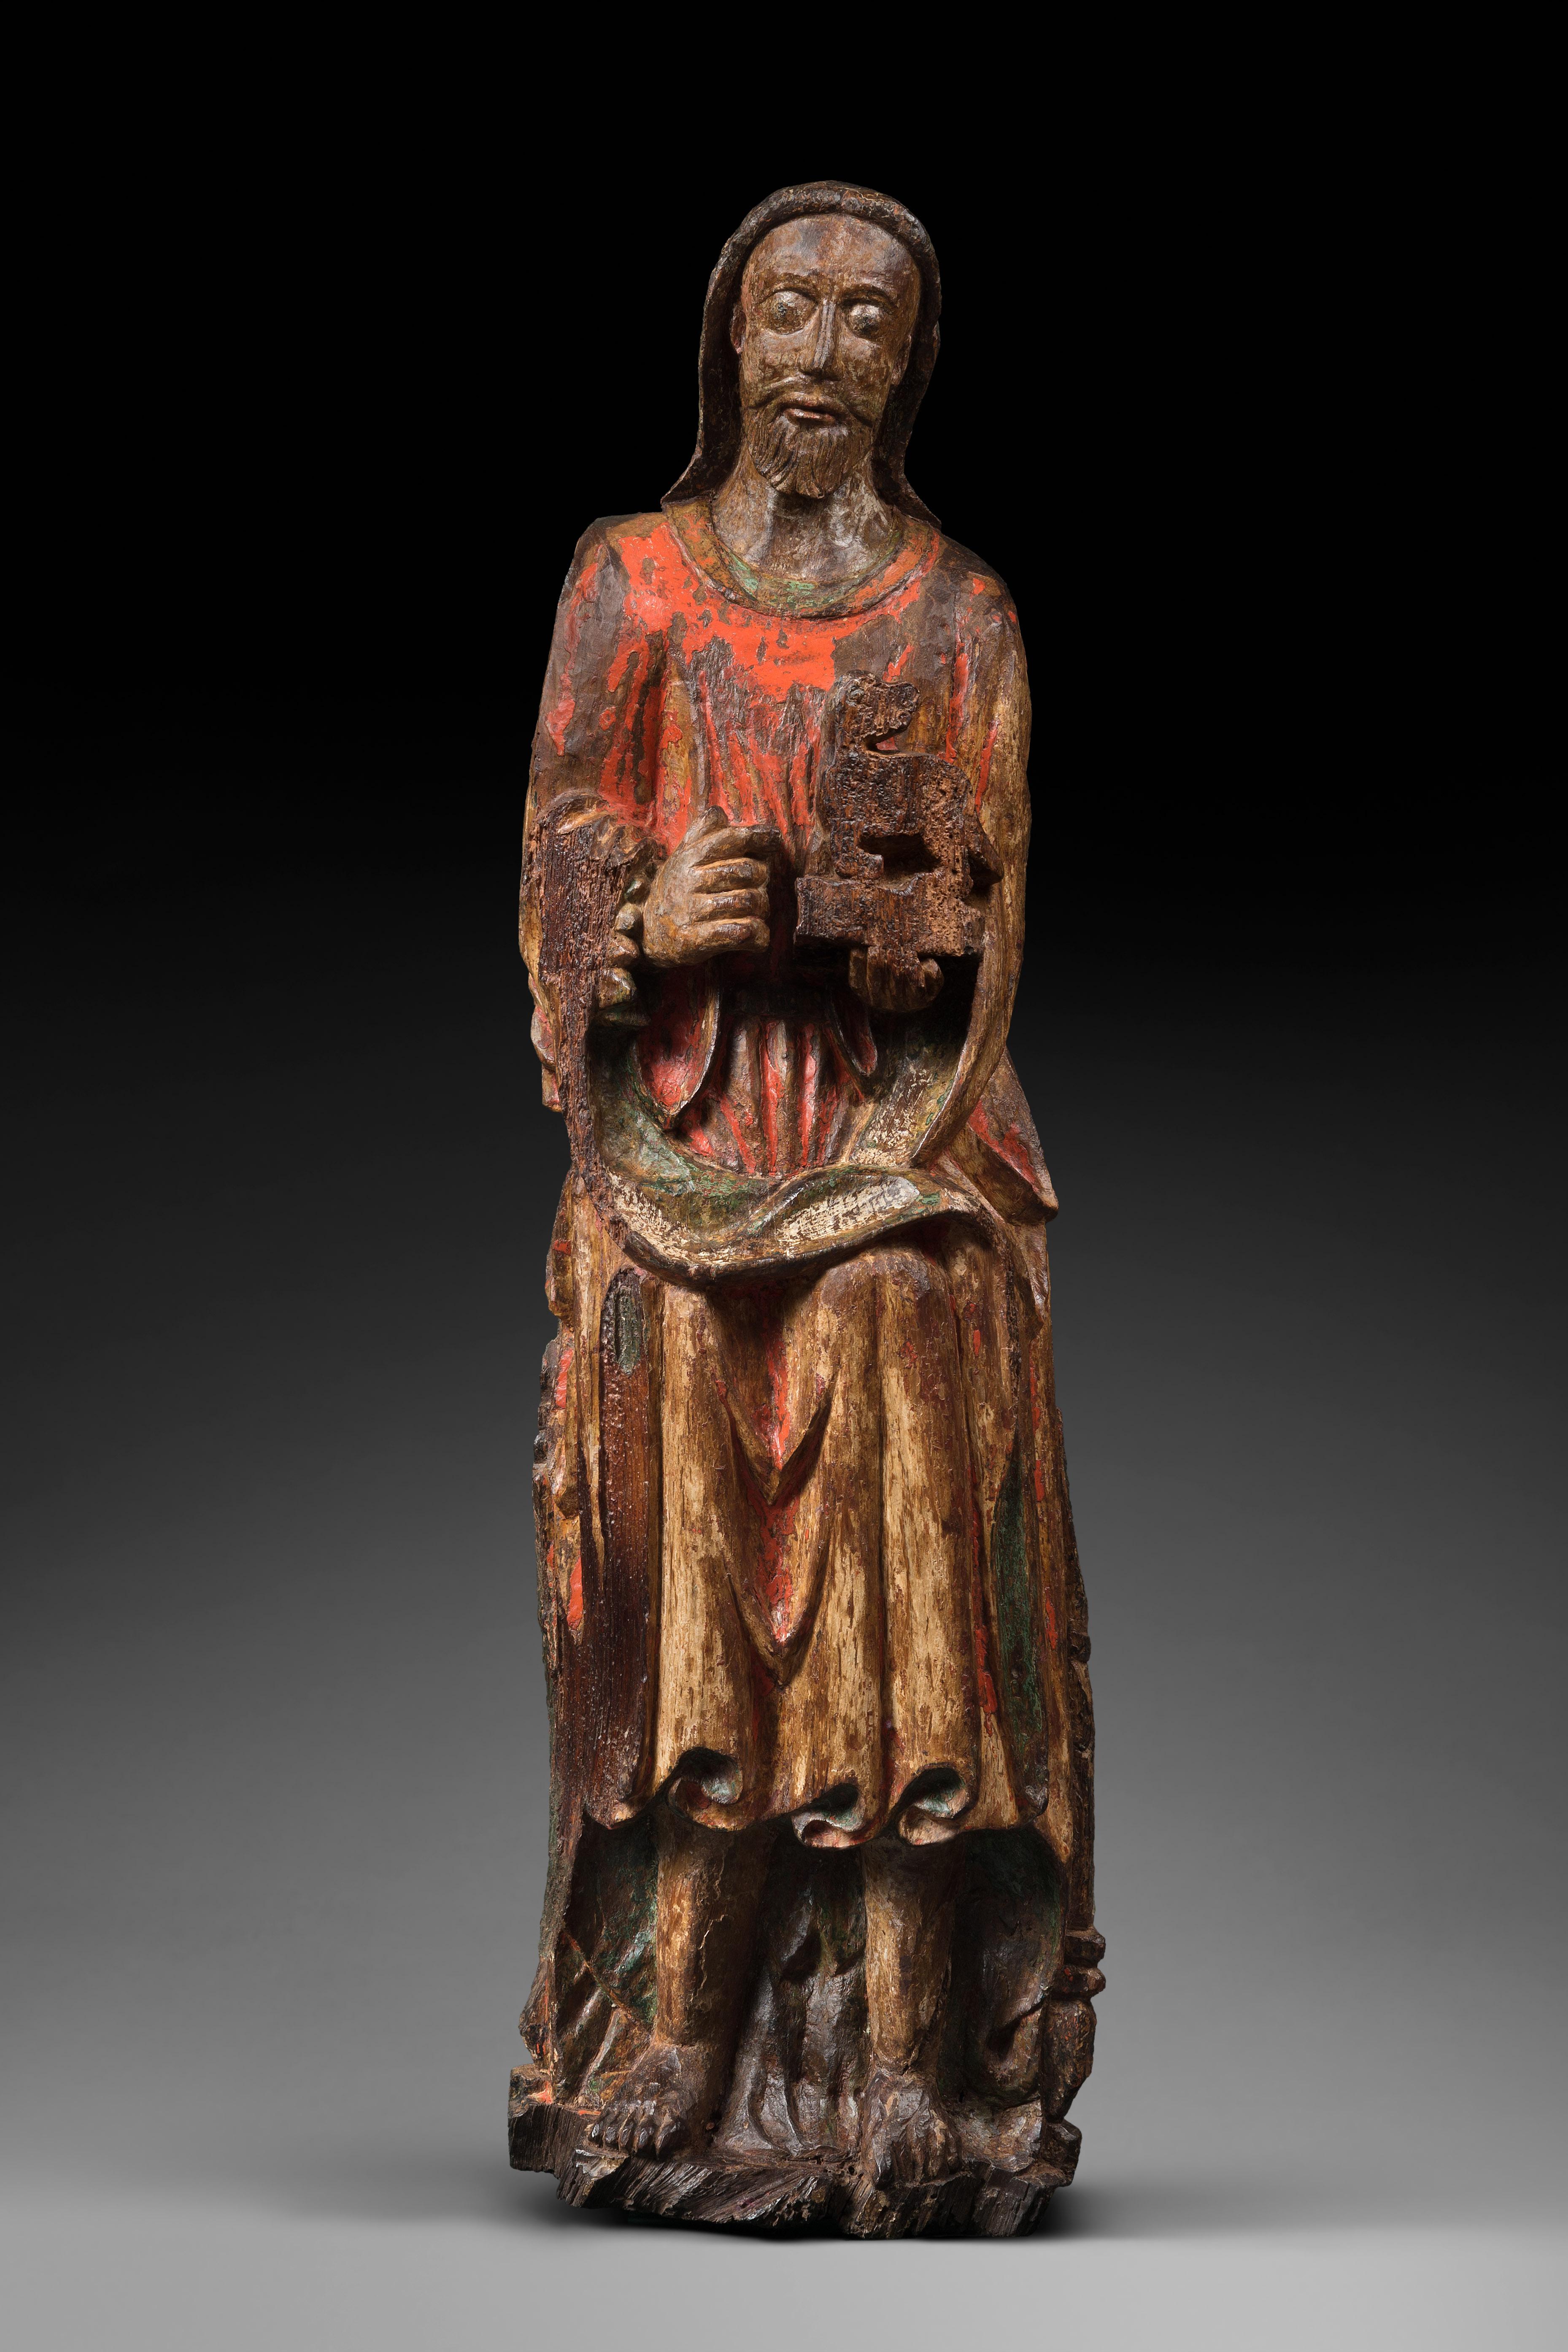 This wood scultpure showing fine traces of polychromy depicts John the Baptist, one the Old Testament’s last prophets and the first martyr of the New Testament. He is easily recognizable with the lamb he is carrying in his left hand. The way the